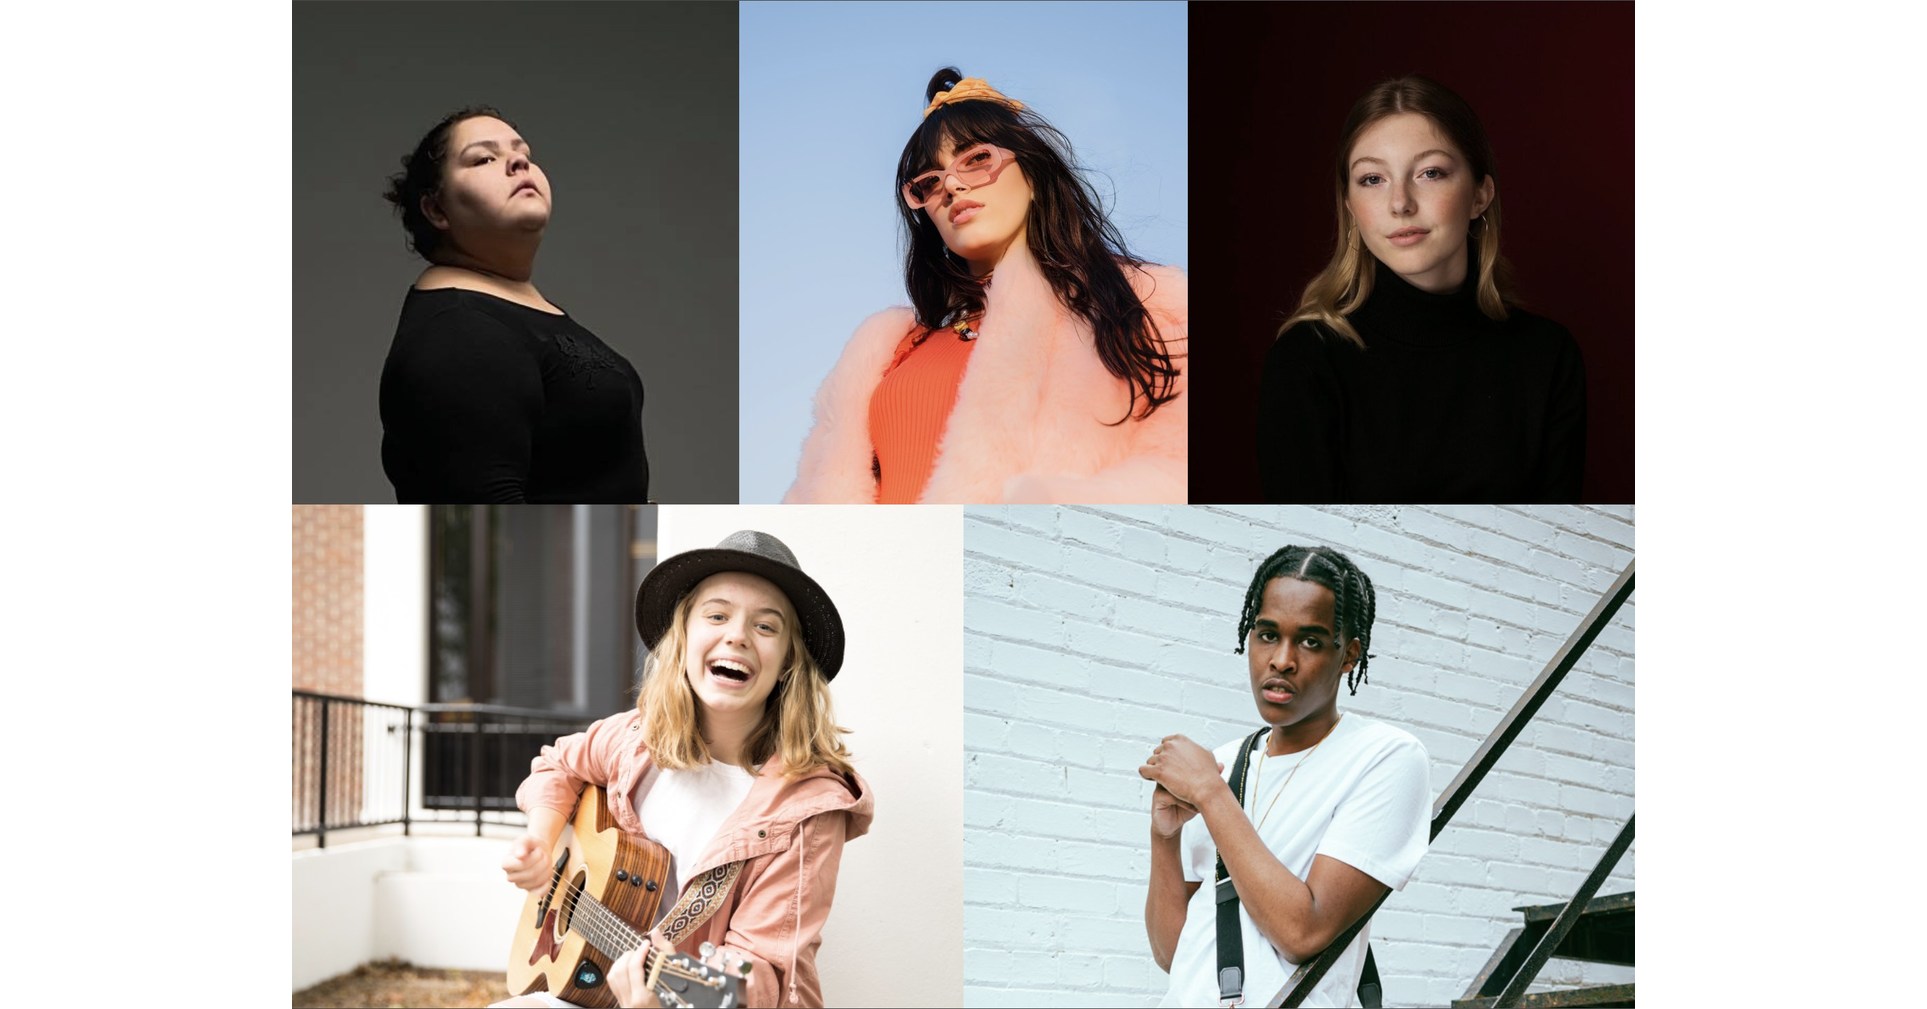 The SOCAN Foundation announces the five winners of the Young Canadian Songwriters Competition, sponsored by SiriusXM Canada

